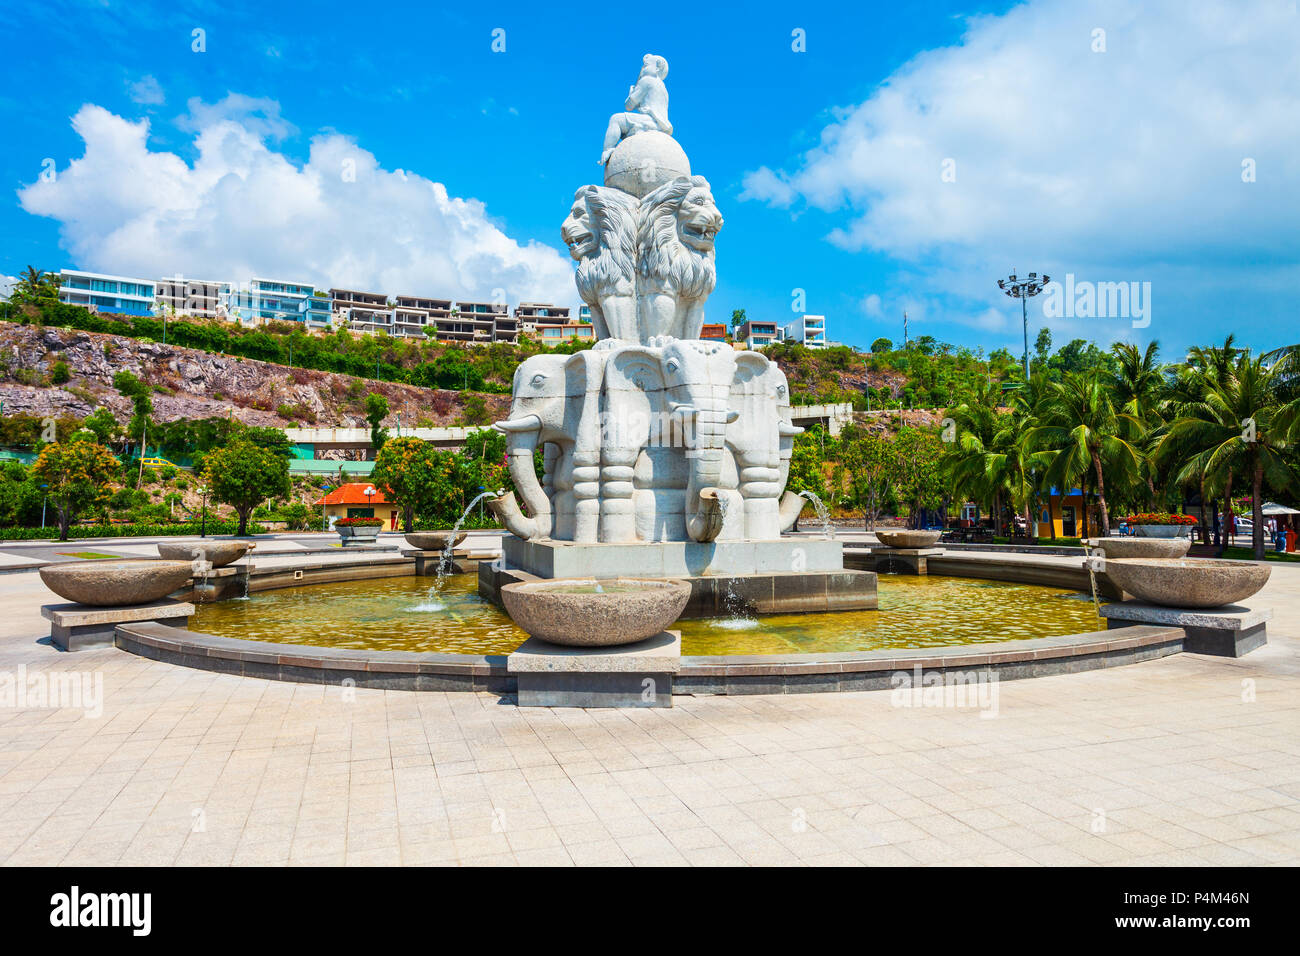 Lion and elephant sculpture at the Vinpearl amusement park in Nha Trang in Vietnam Stock Photo